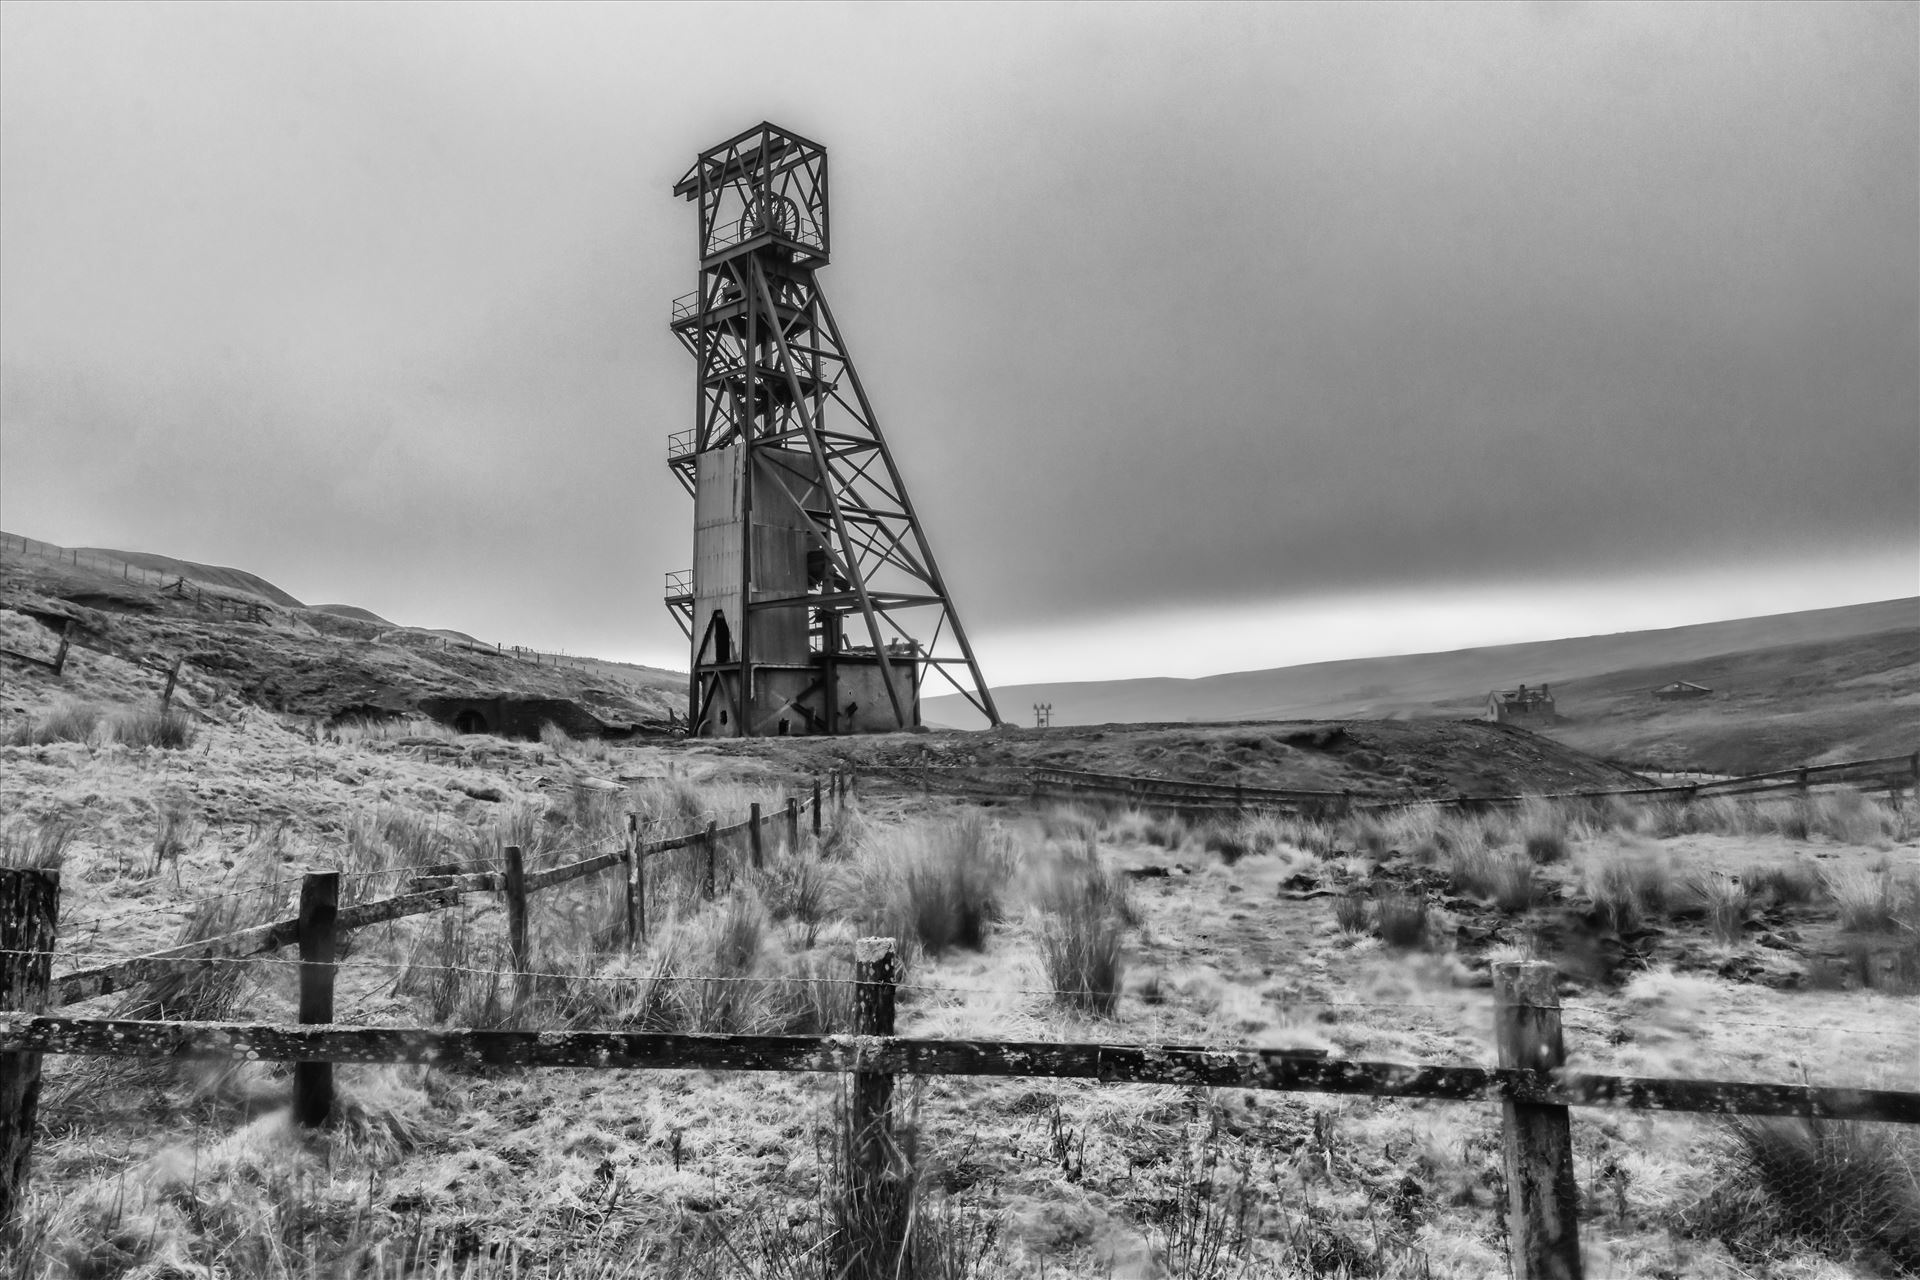 Groverake mine, Weardale This mine in a remote part of Weardale was first in operation in the 18th century, initially mining for iron ore but this was not as productive as had been hoped so they later switched to mining for fluorspar until the closure in 1999. by philreay